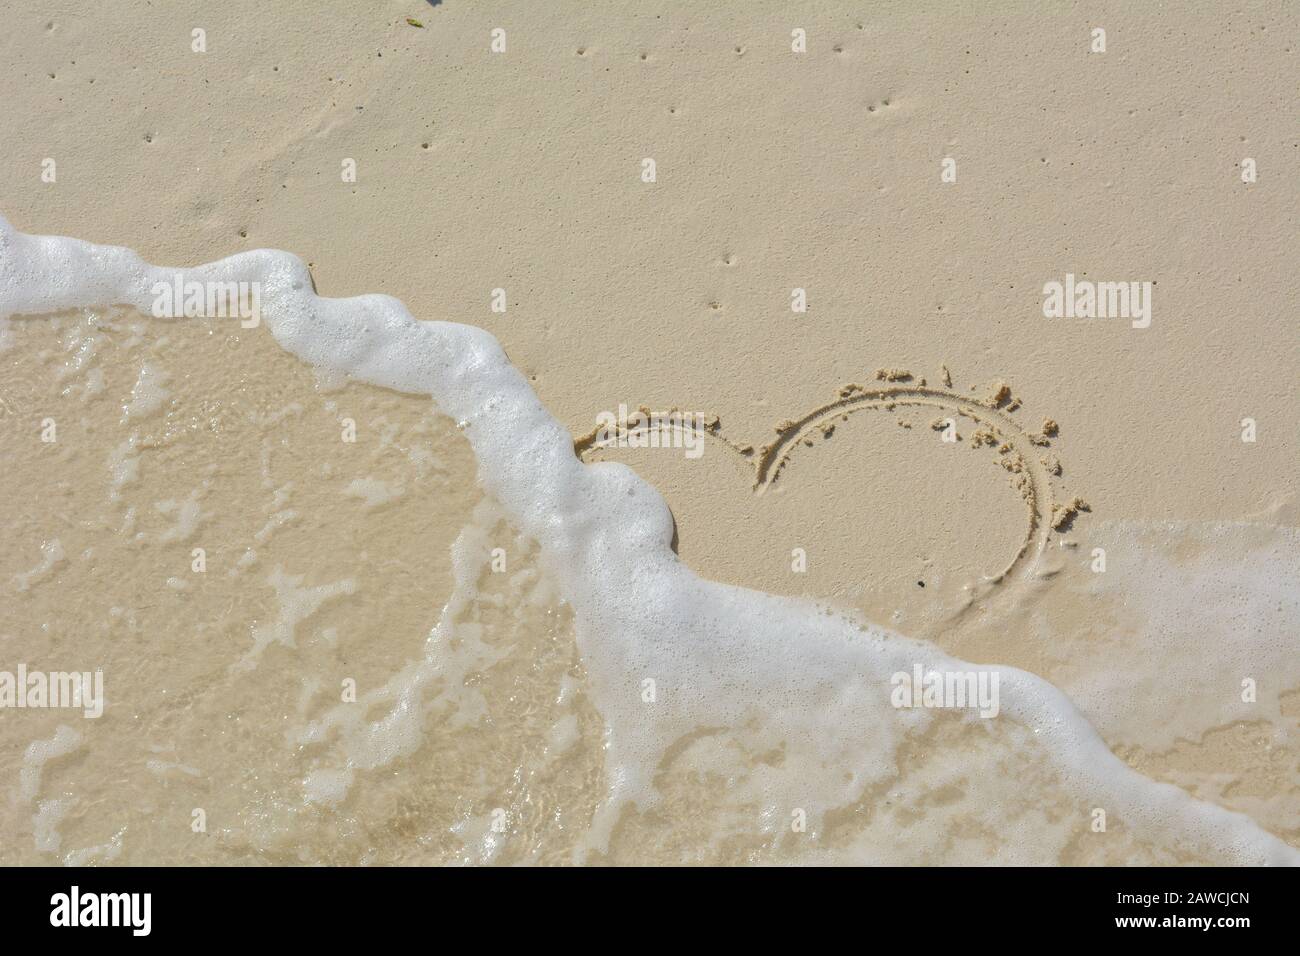 Heart Wrote In The Sand And Washed Away By Waves Stock Photo Alamy